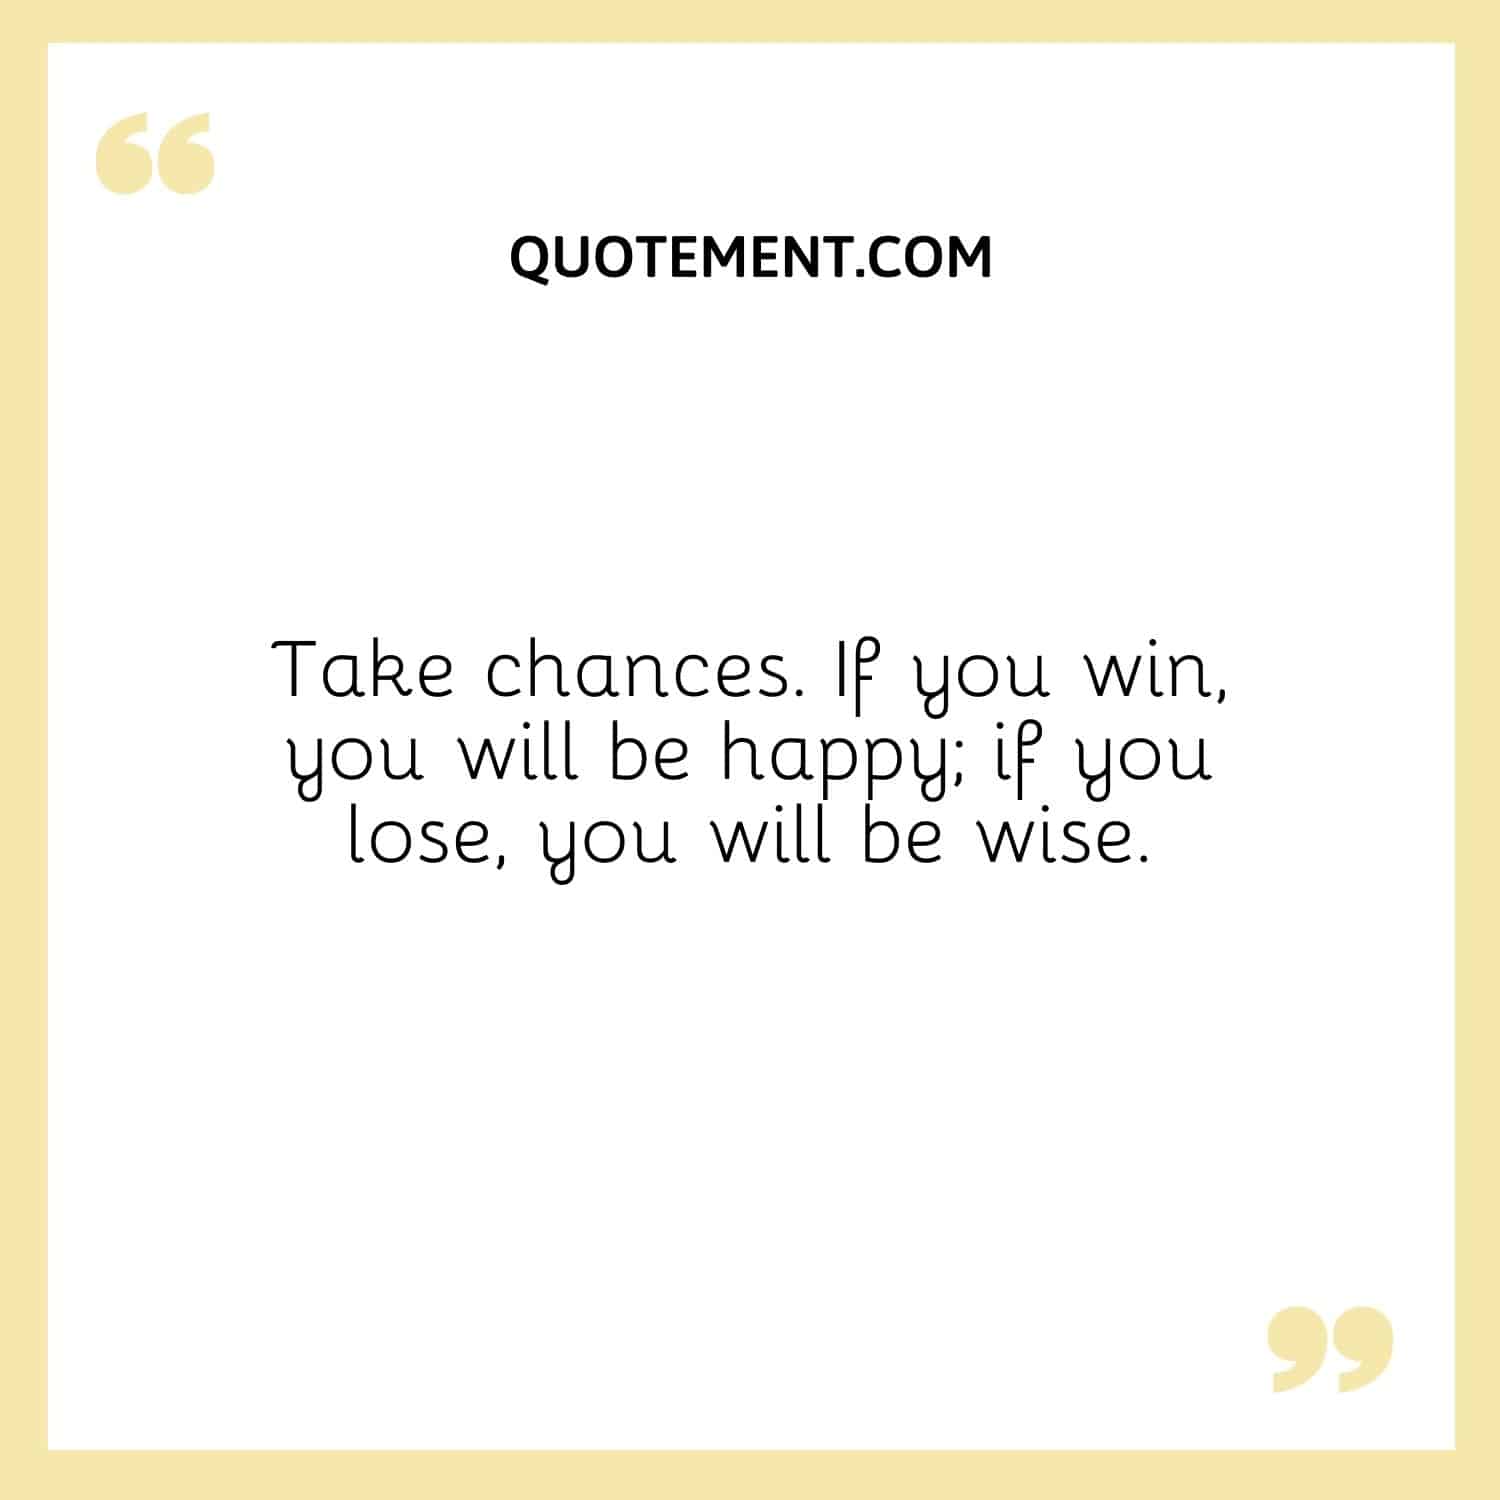 Take chances. If you win, you will be happy; if you lose, you will be wise.